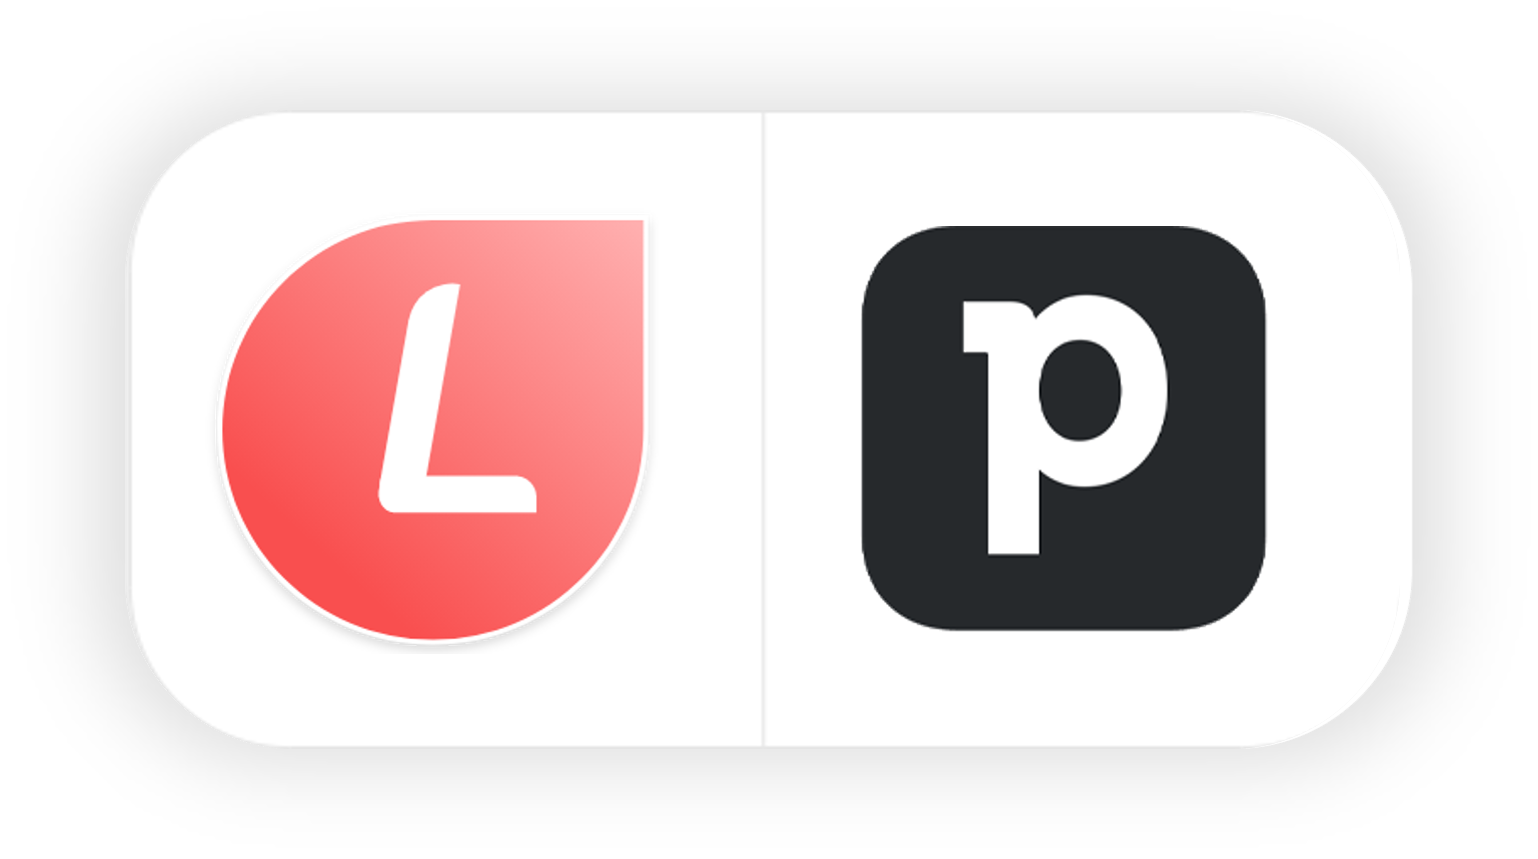 LeadGen App forms integration with Pipedrive